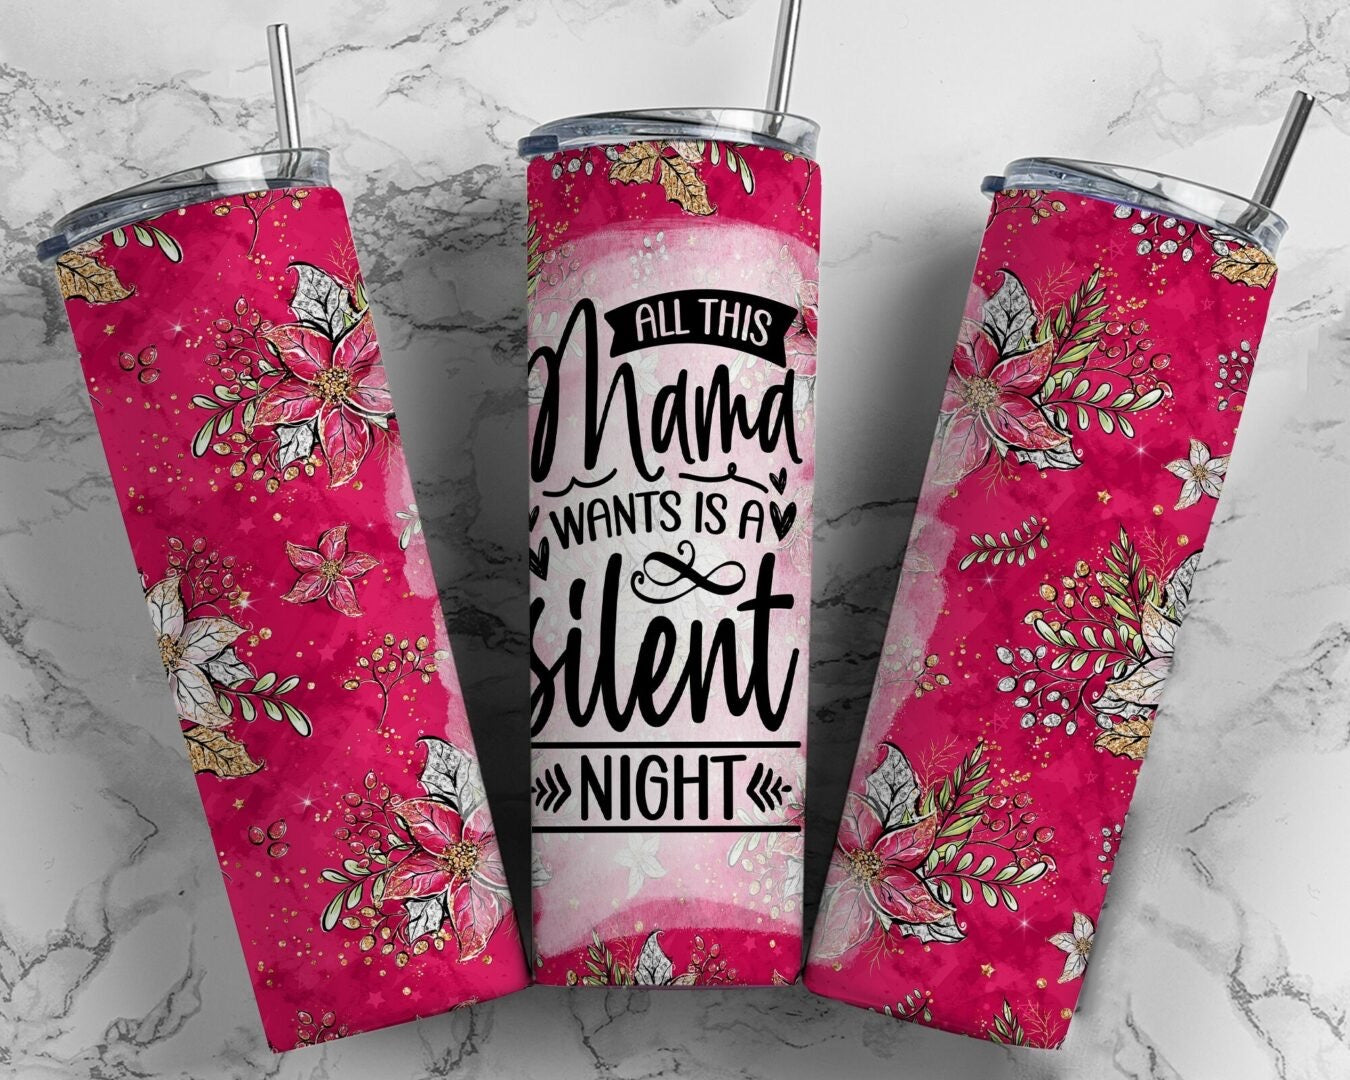 All this mama wants is a silent night   20 OZ OR 30 OZ SKINNY Tumbler - not custom